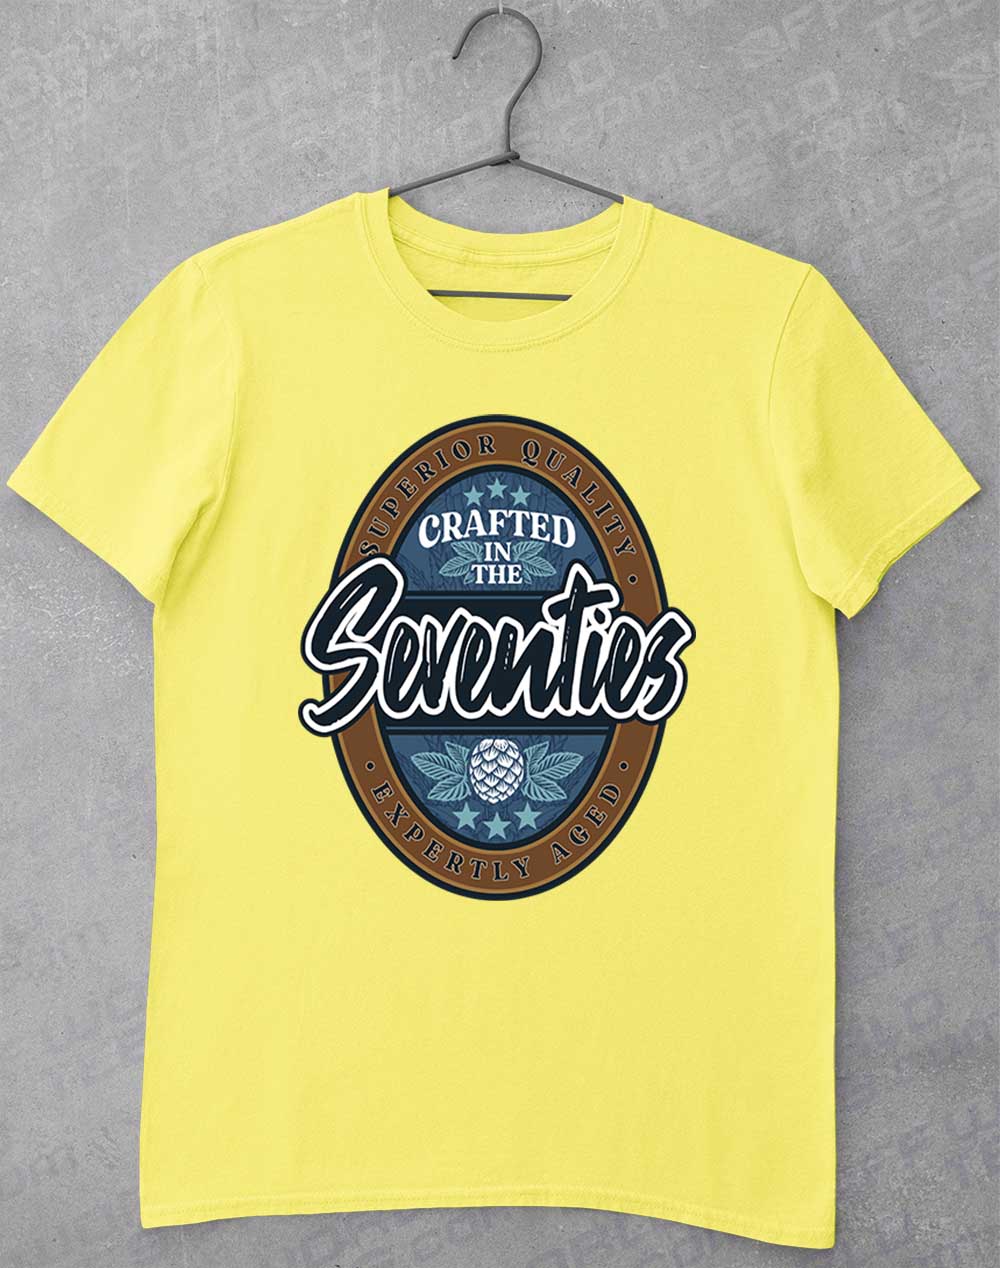 Crafted in the Seventies T-Shirt